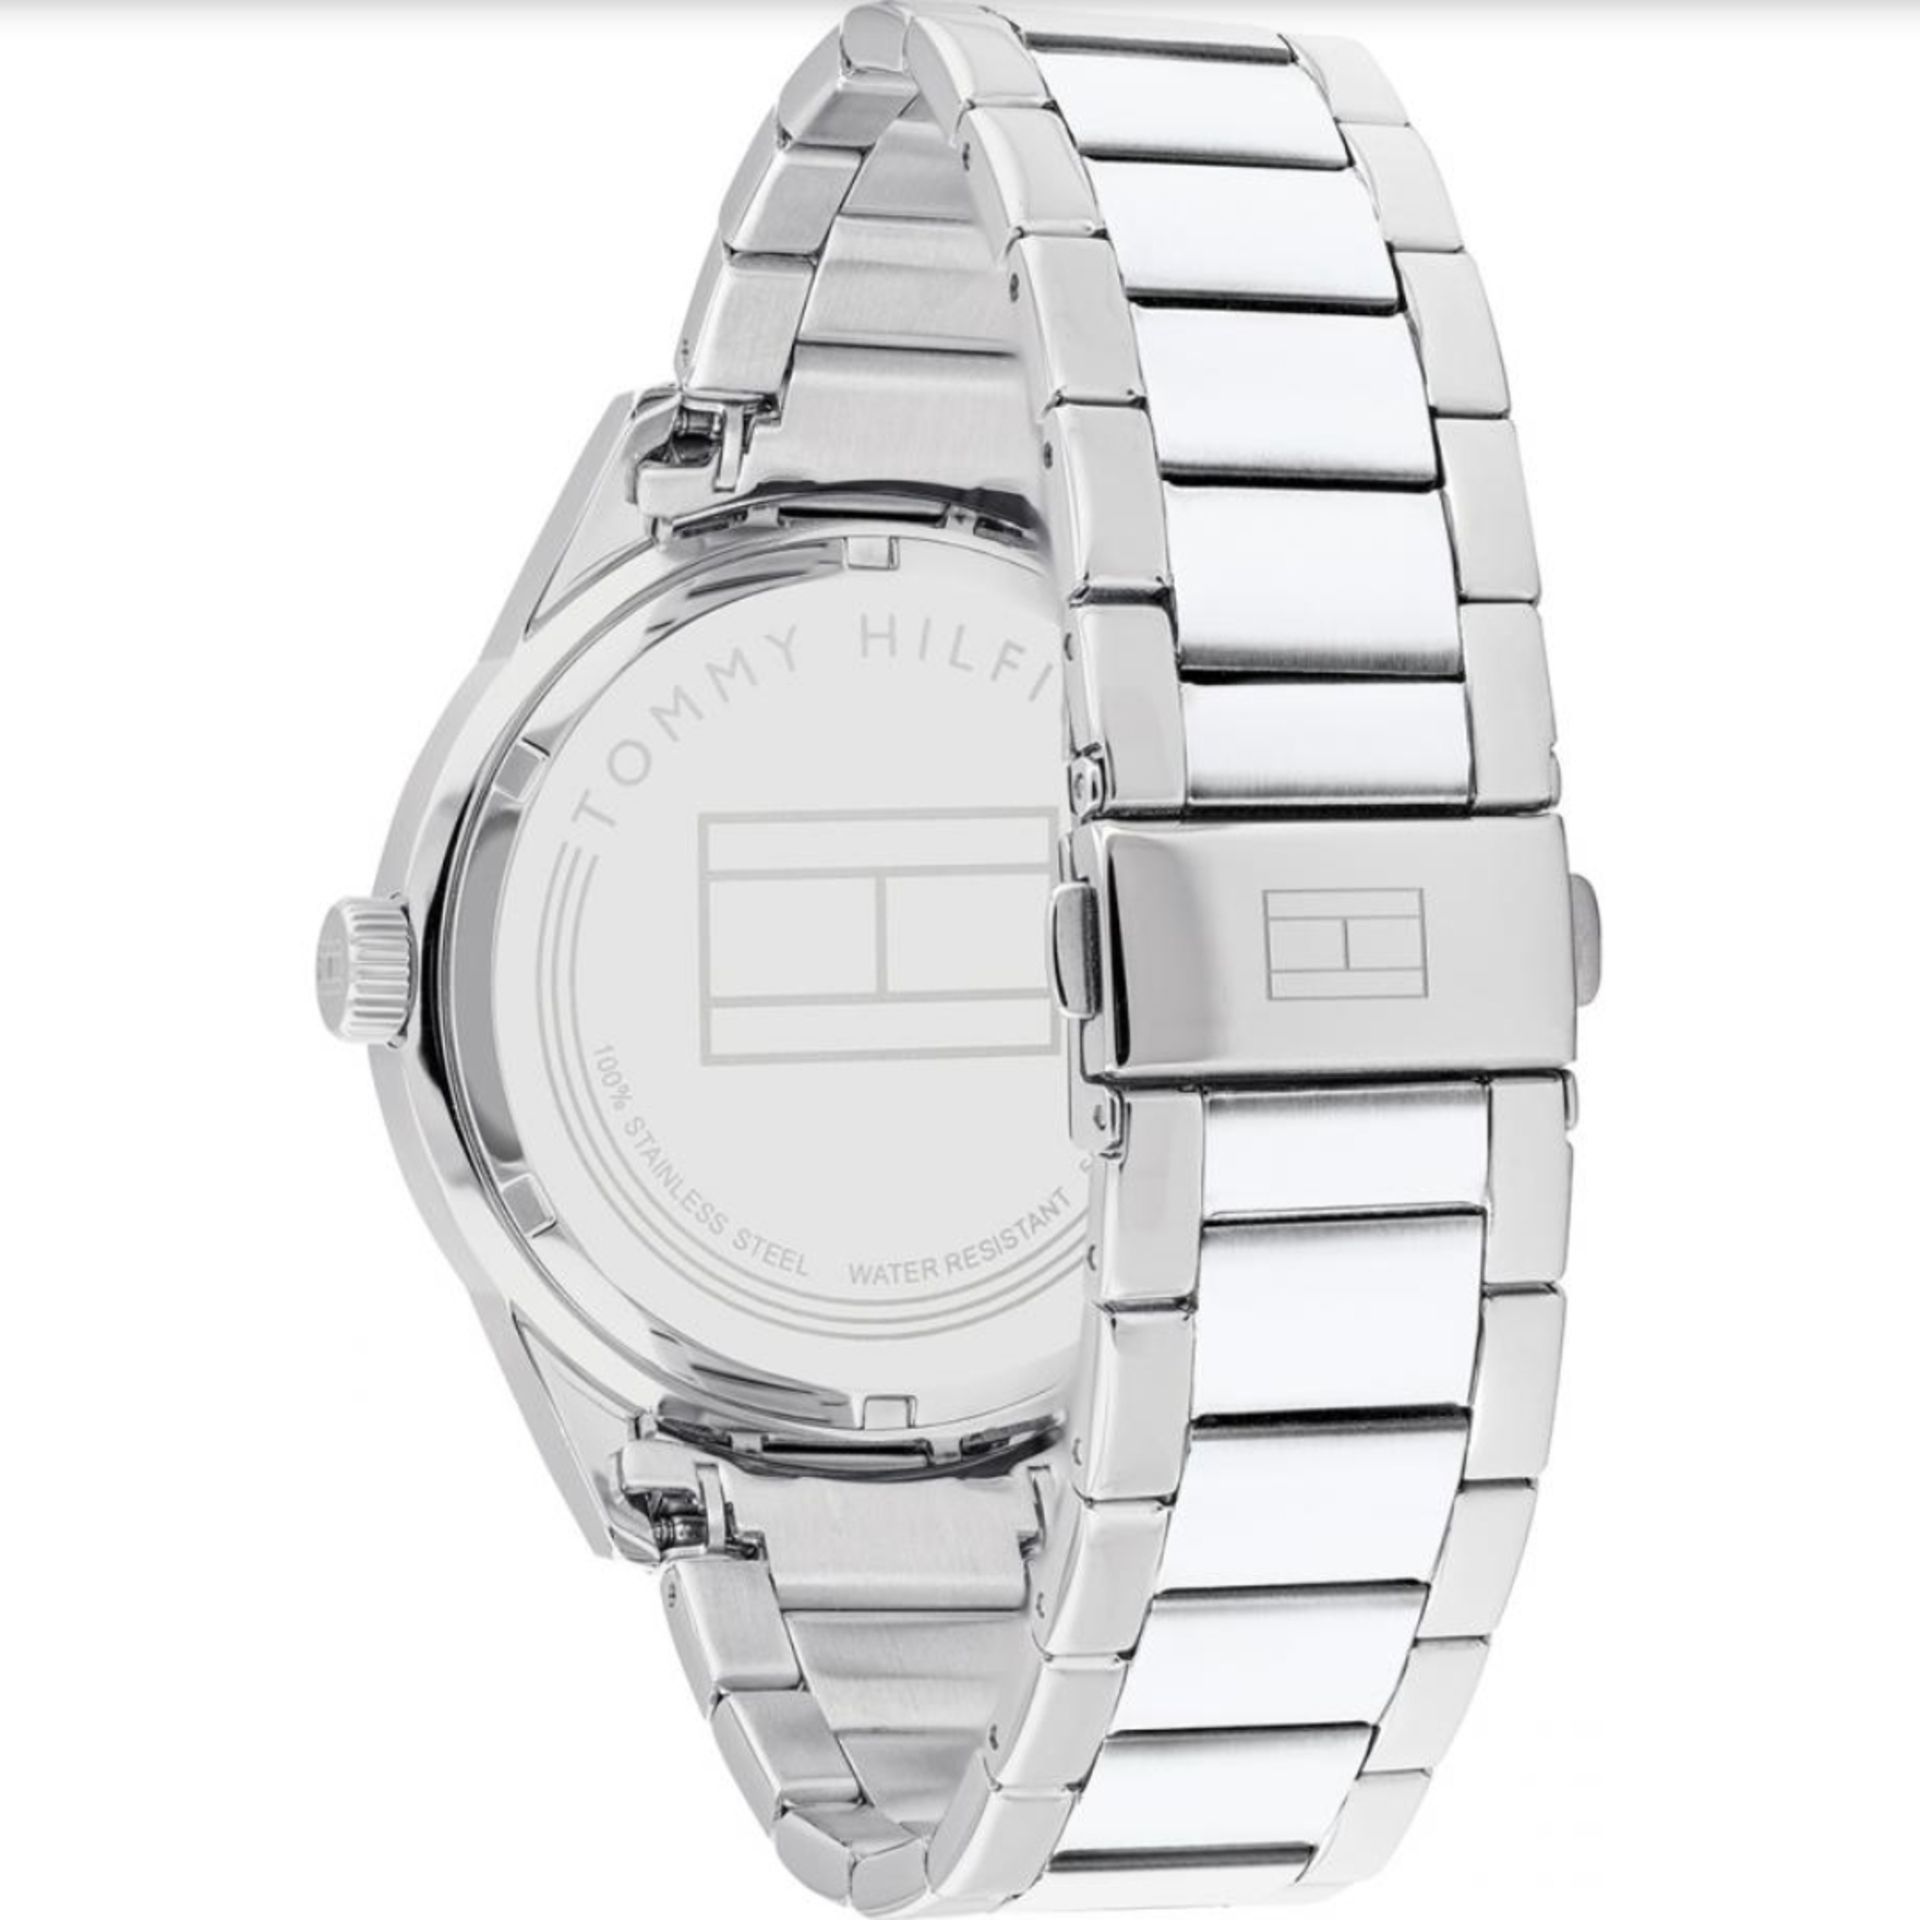 Tommy Hilfiger 1791639 Men's Black And Silver Stainless Steel Bracelet Watch - Image 4 of 7